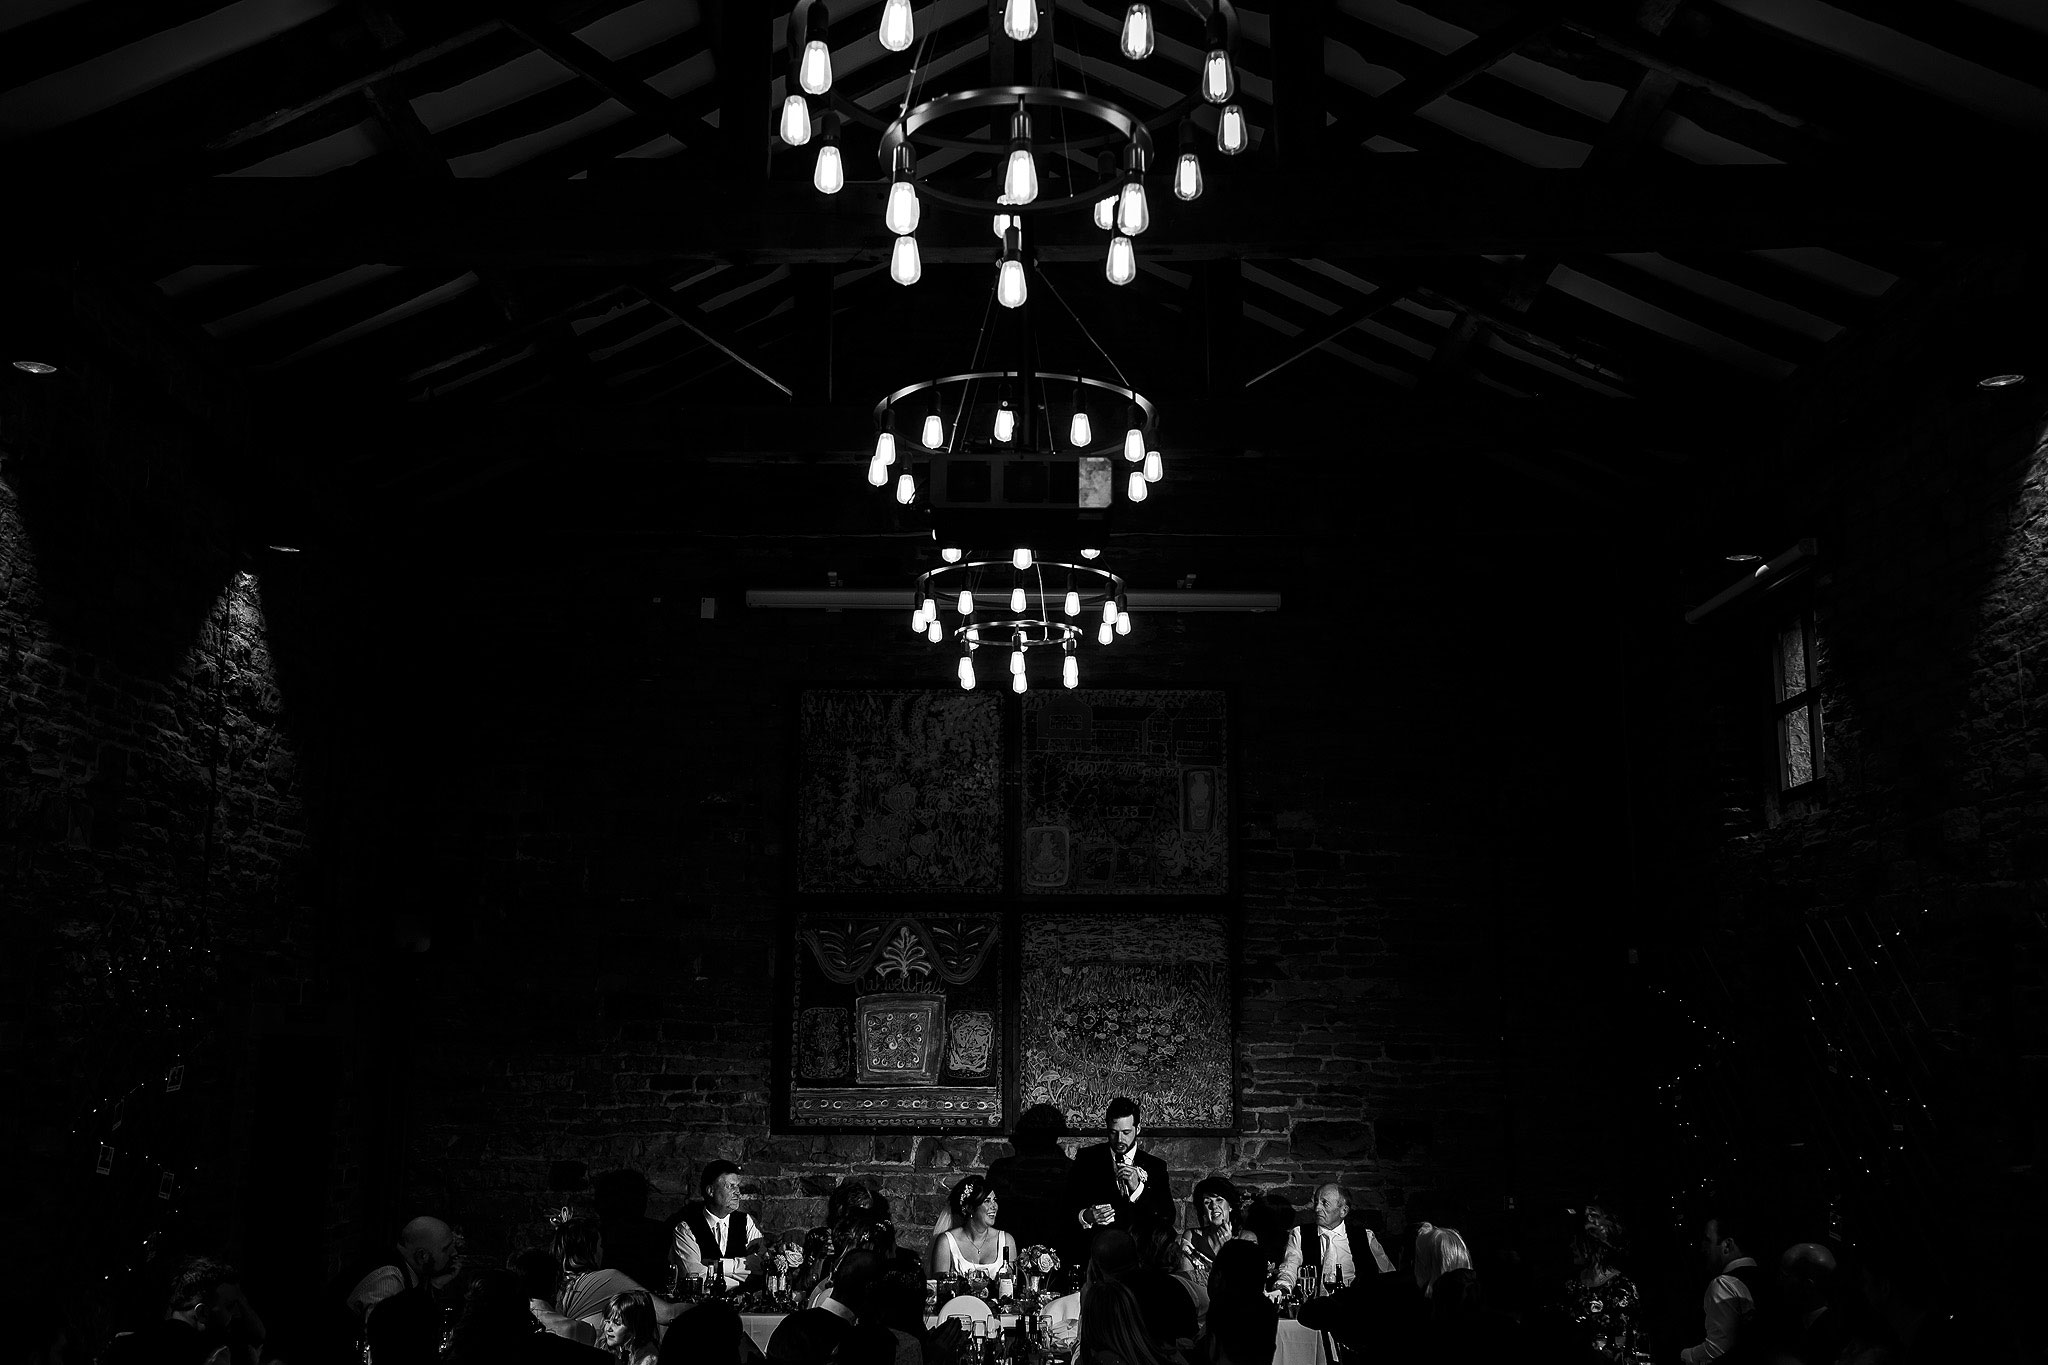 Oakwell Hall Barn wedding speeches with banqueting layout of tables